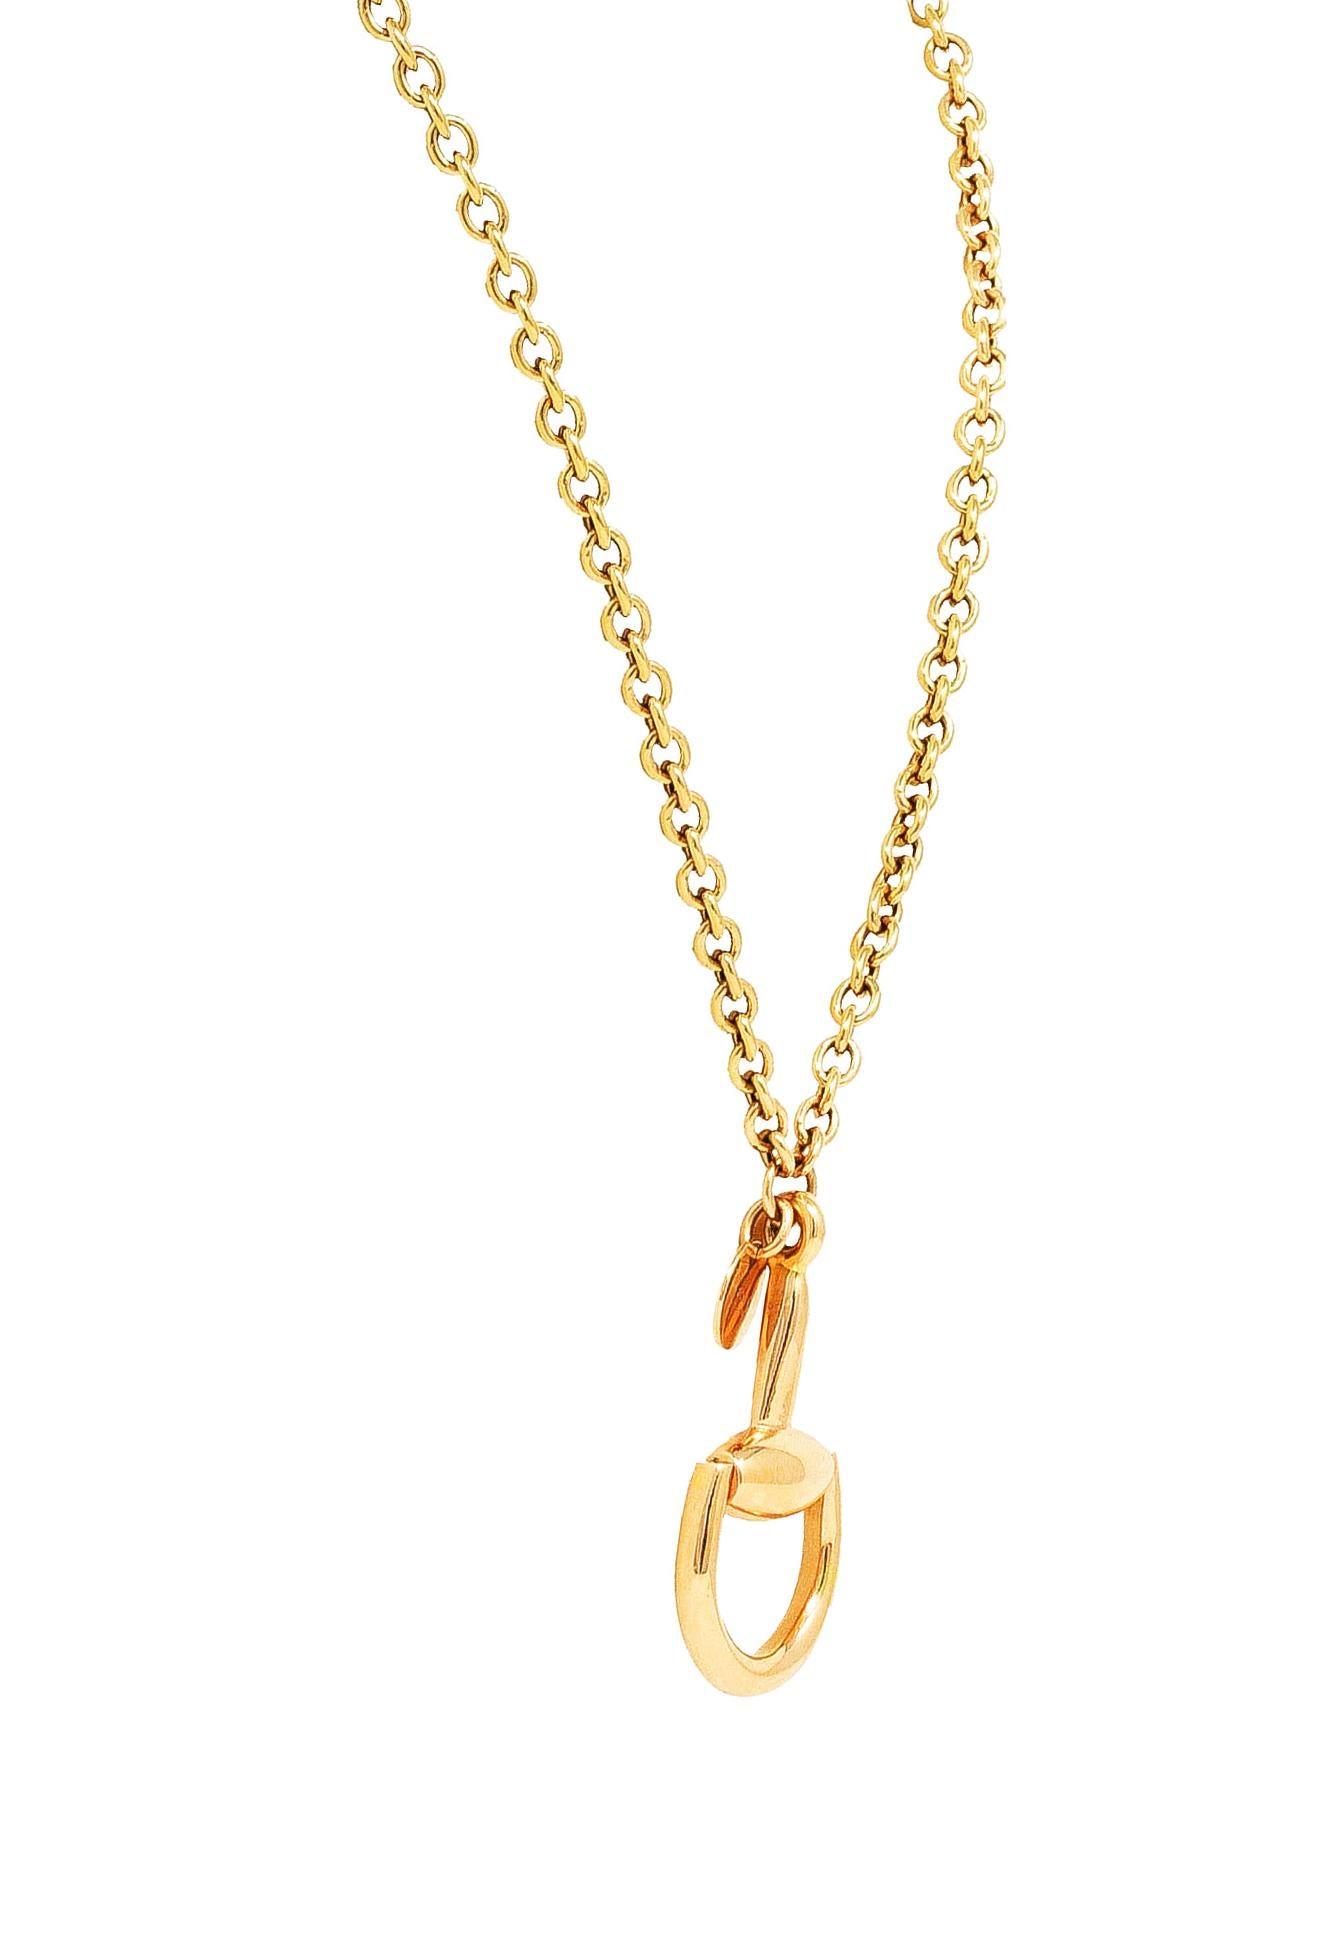 Gucci Contemporary 18 Karat Yellow Gold Horsebit Pendant Necklace In Excellent Condition For Sale In Philadelphia, PA